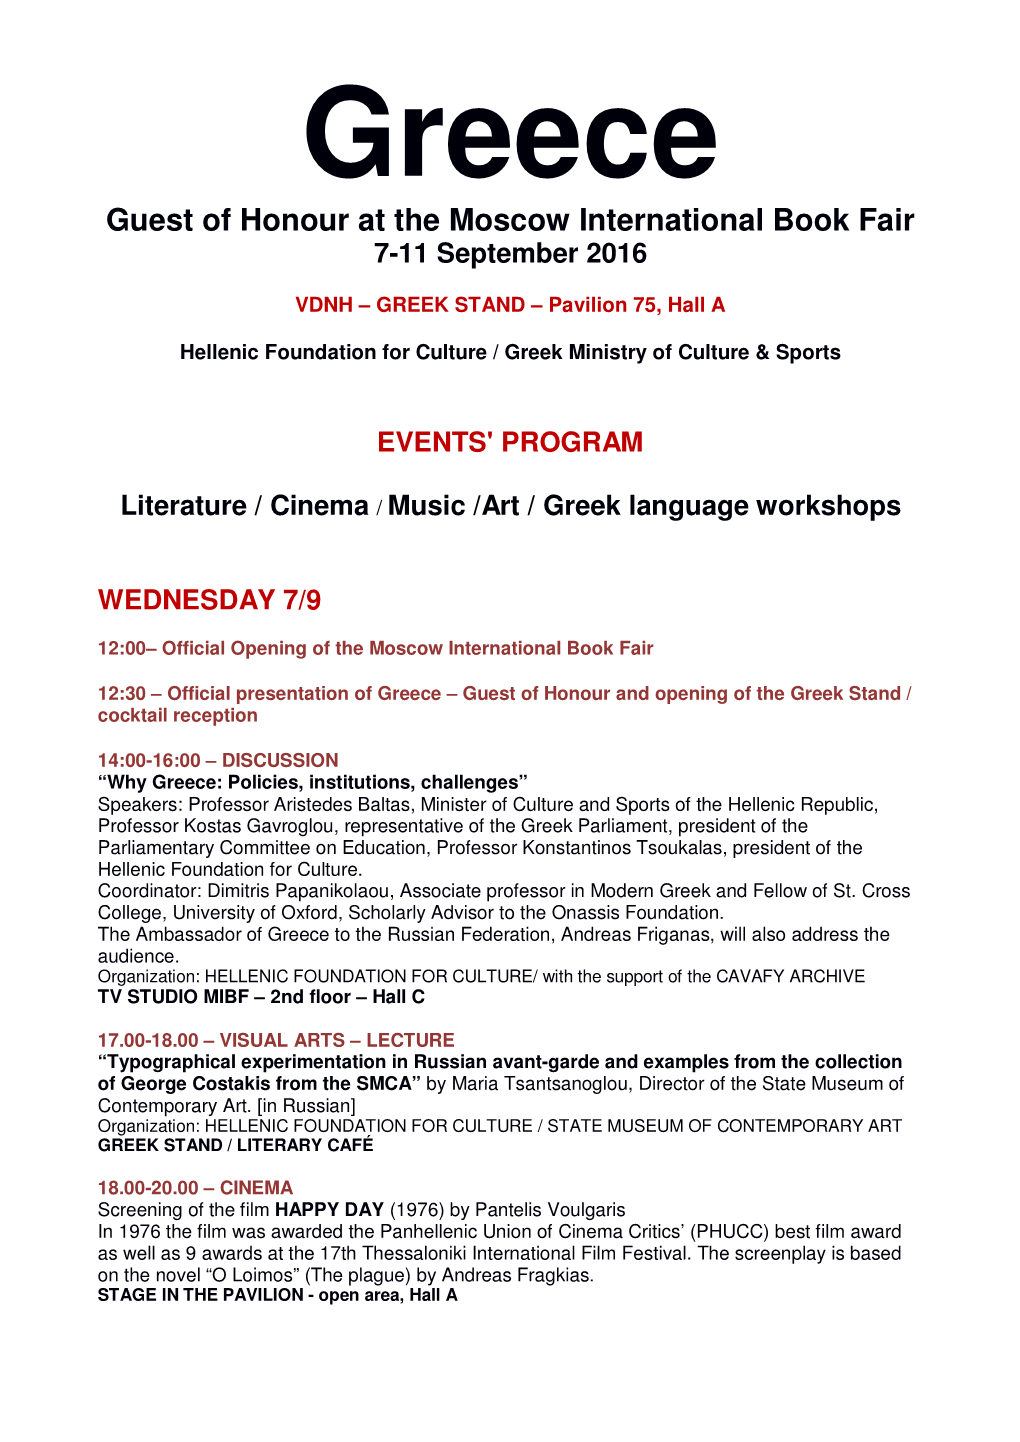 Guest of Honour at the Moscow International Book Fair 7-11 September 2016